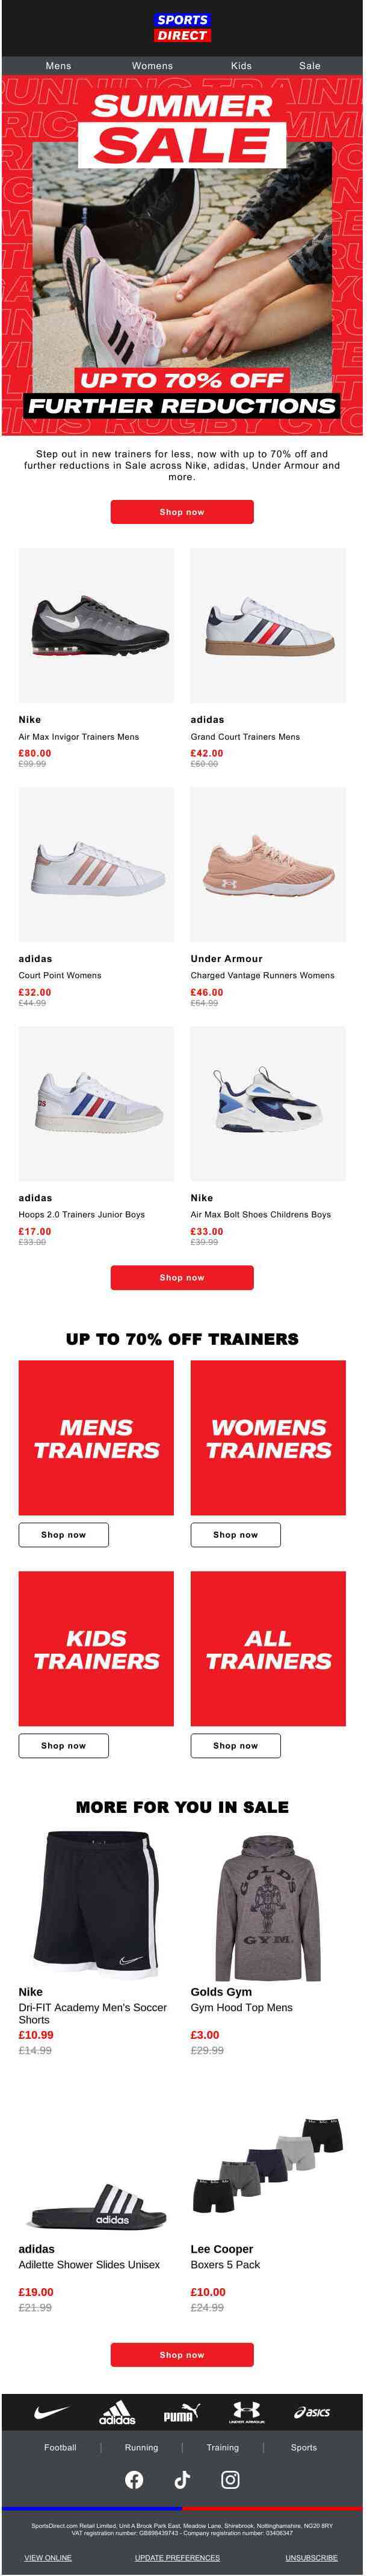 ⚠️ SALE: Up to 70% off trainers ⚠️